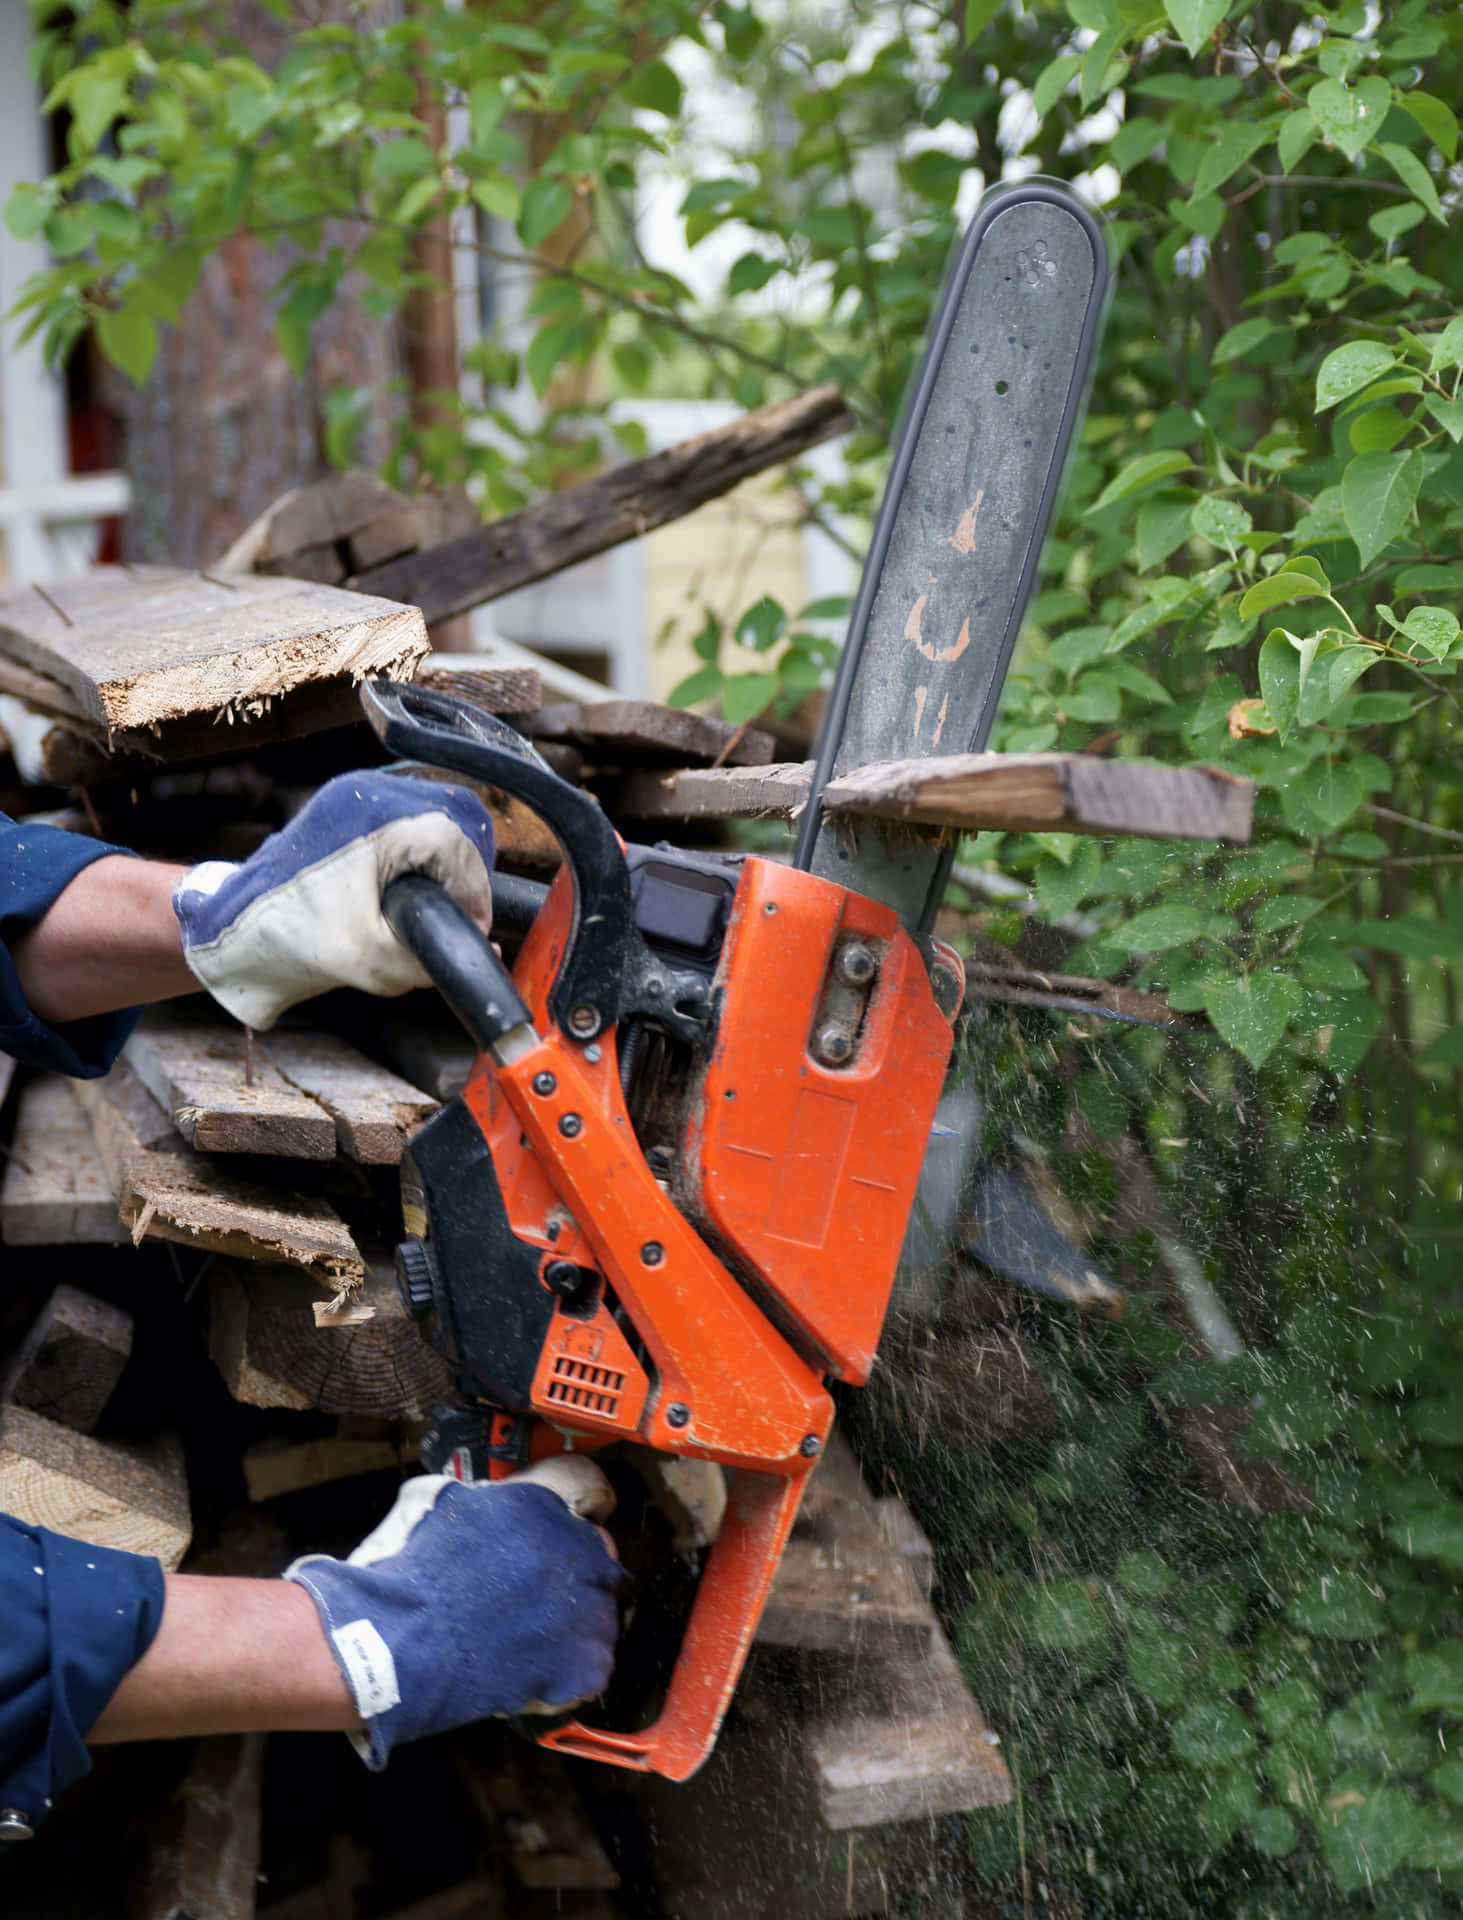 A professional-grade chainsaw ready for tough tasks.